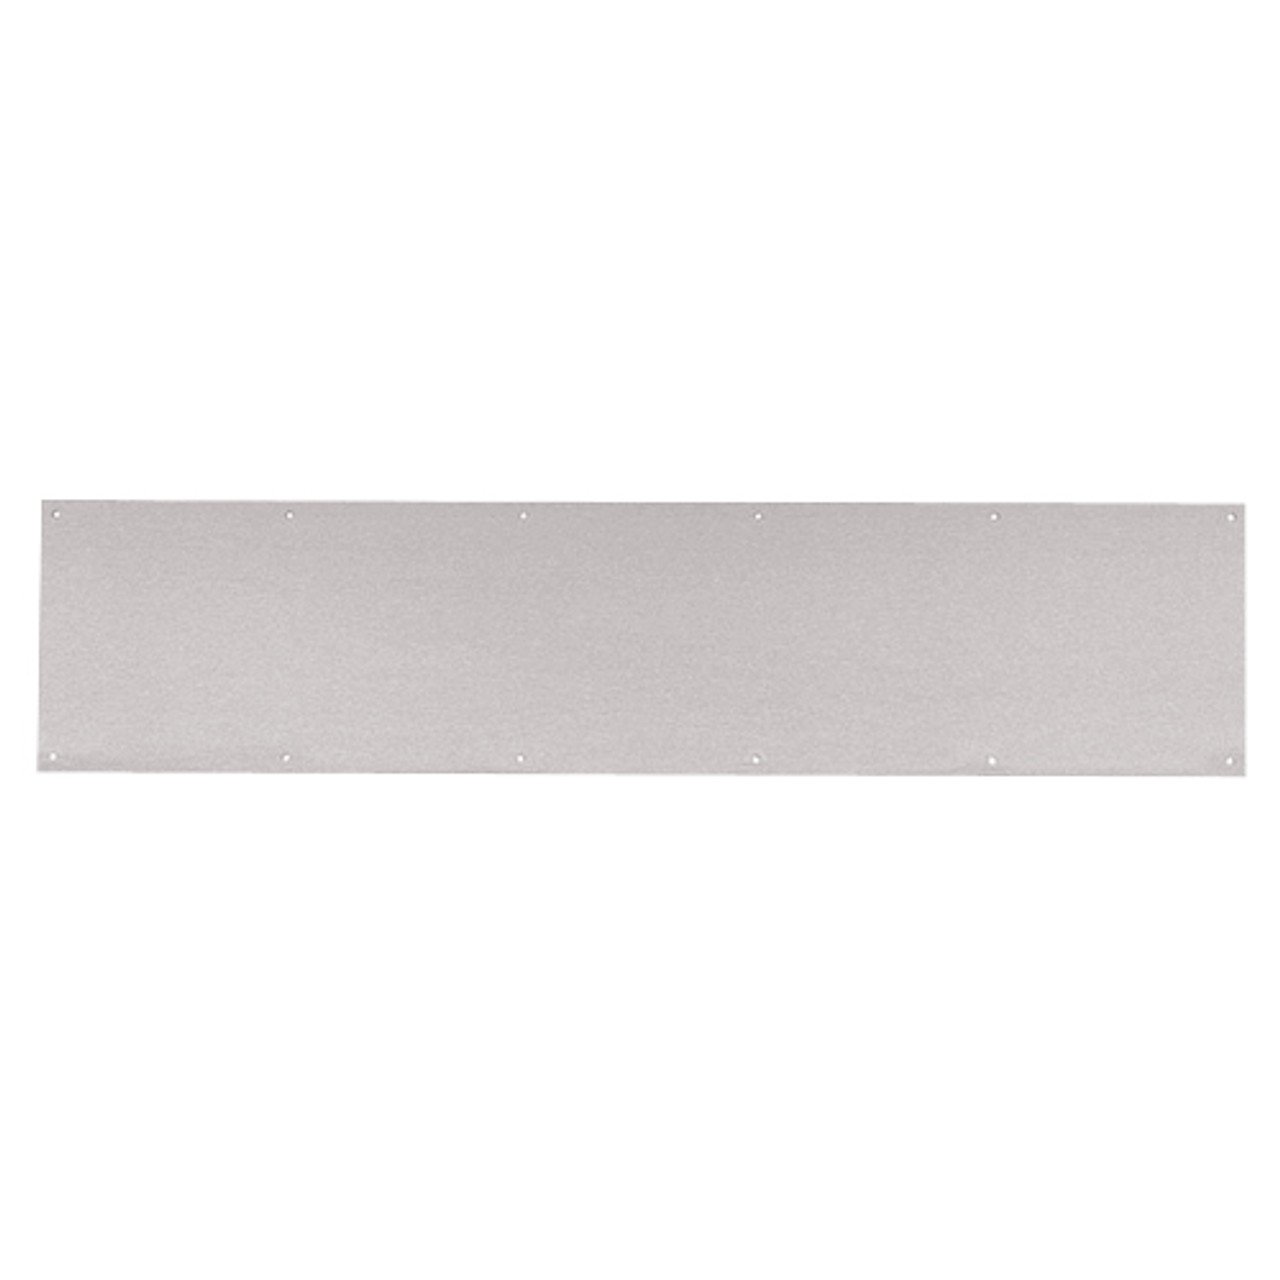 8400-US32D-8x48-B-CS Ives 8400 Series Protection Plate in Satin Stainless Steel